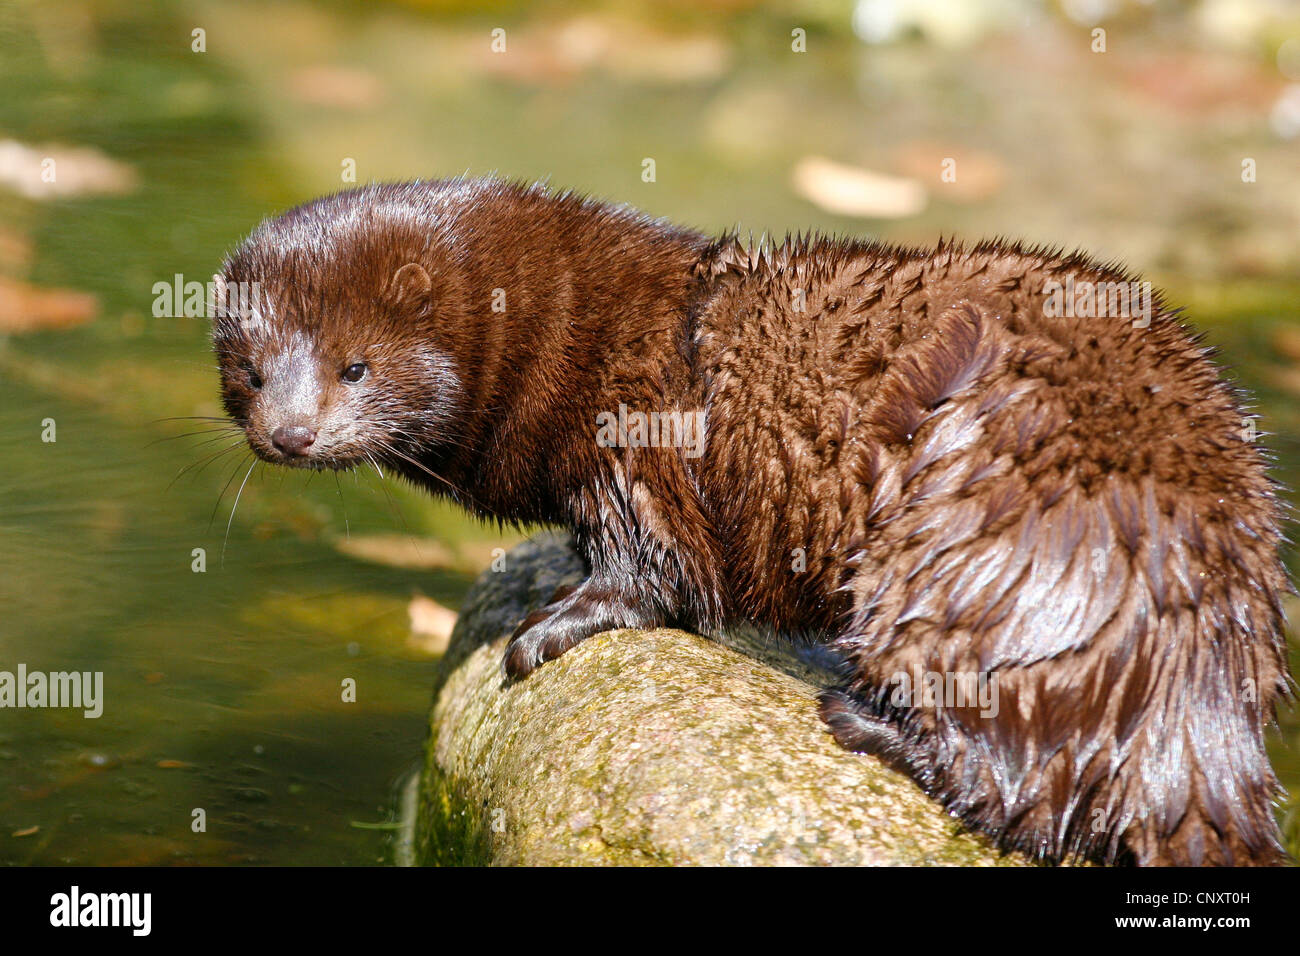 American mink (Mustela vison), sitting on a stone at a riverside, Germany Stock Photo